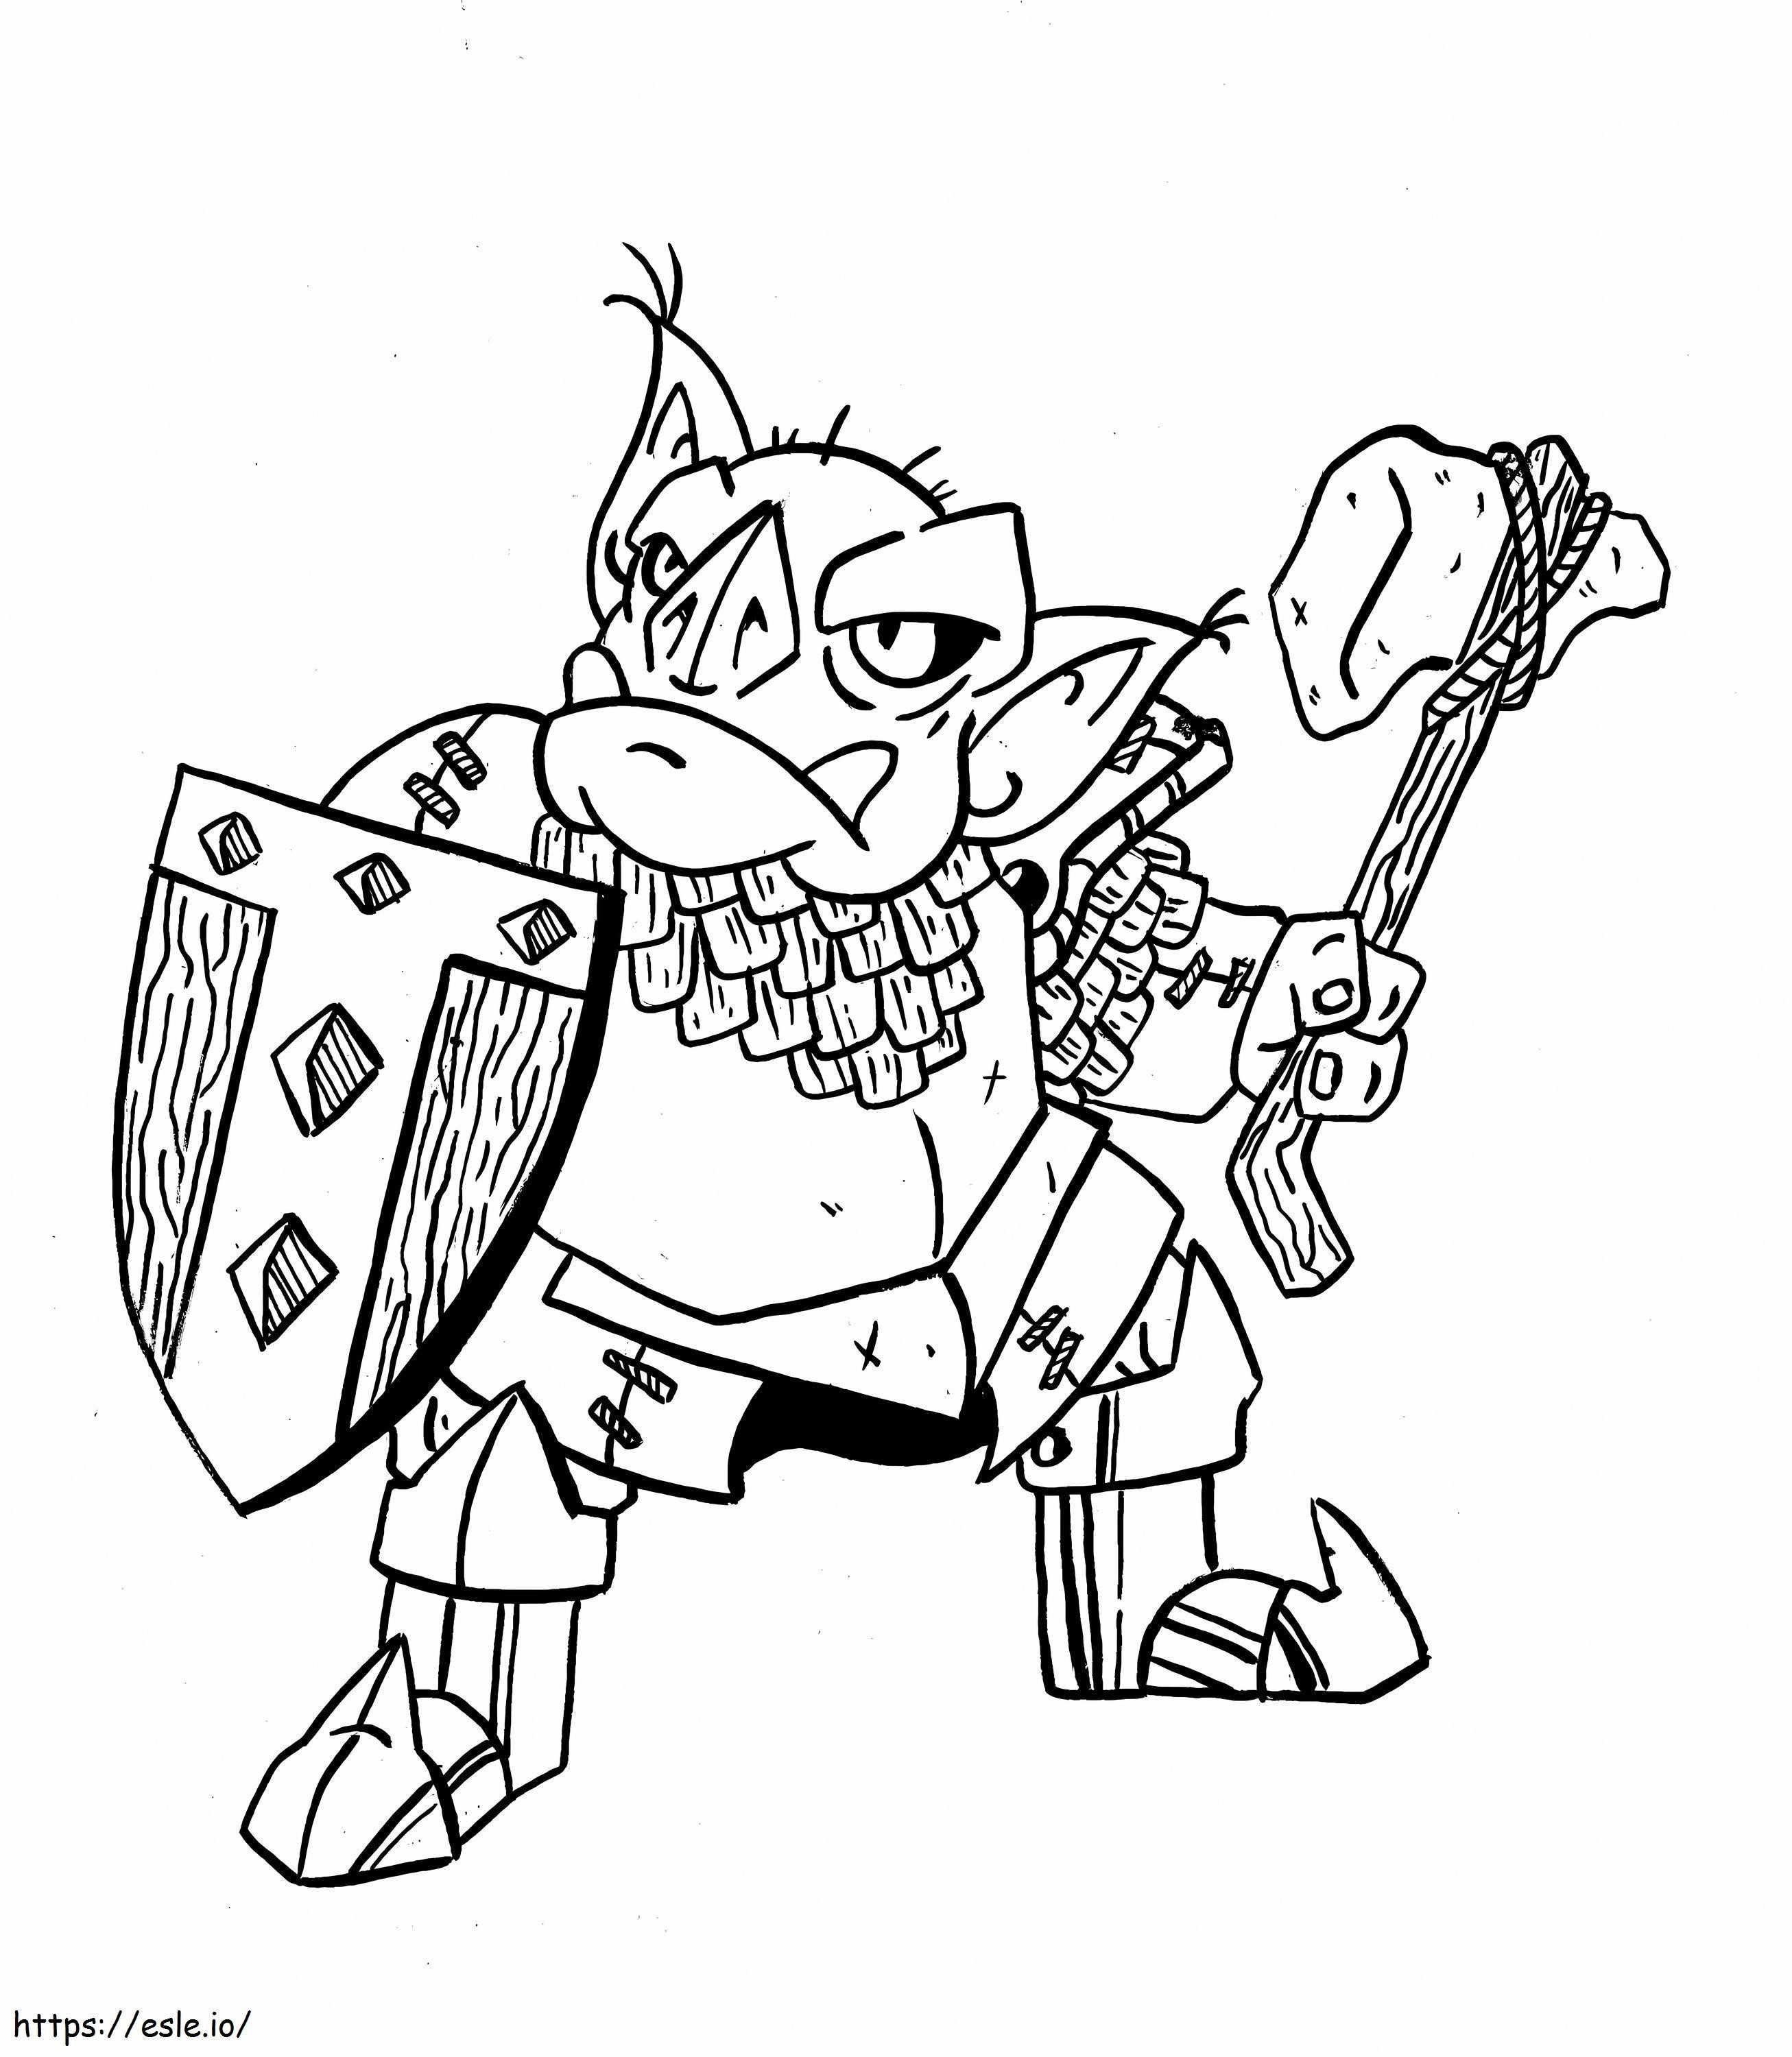 Goblin With Ax And Shield coloring page